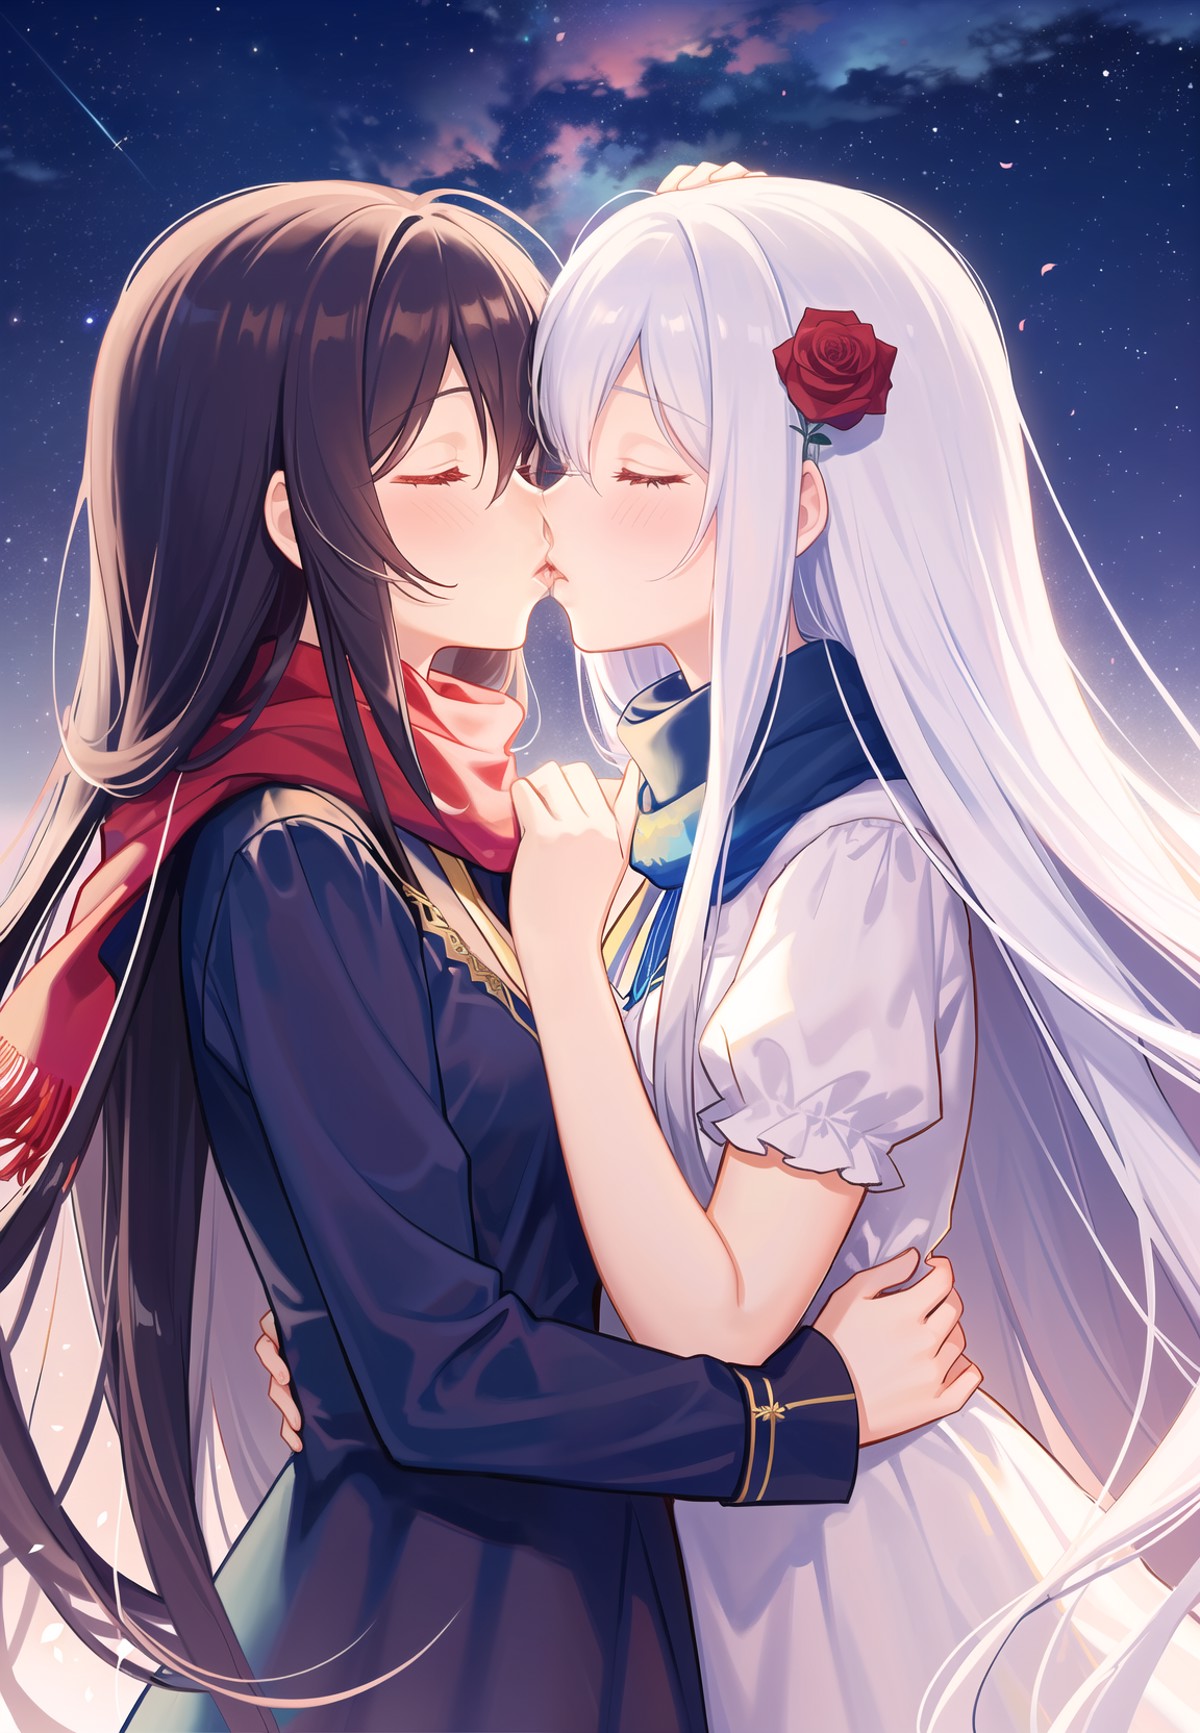 multiple girls, 2girls, long hair, scarf, kiss, Twins, the girl on the left has white hair, the girl on the right has blac...